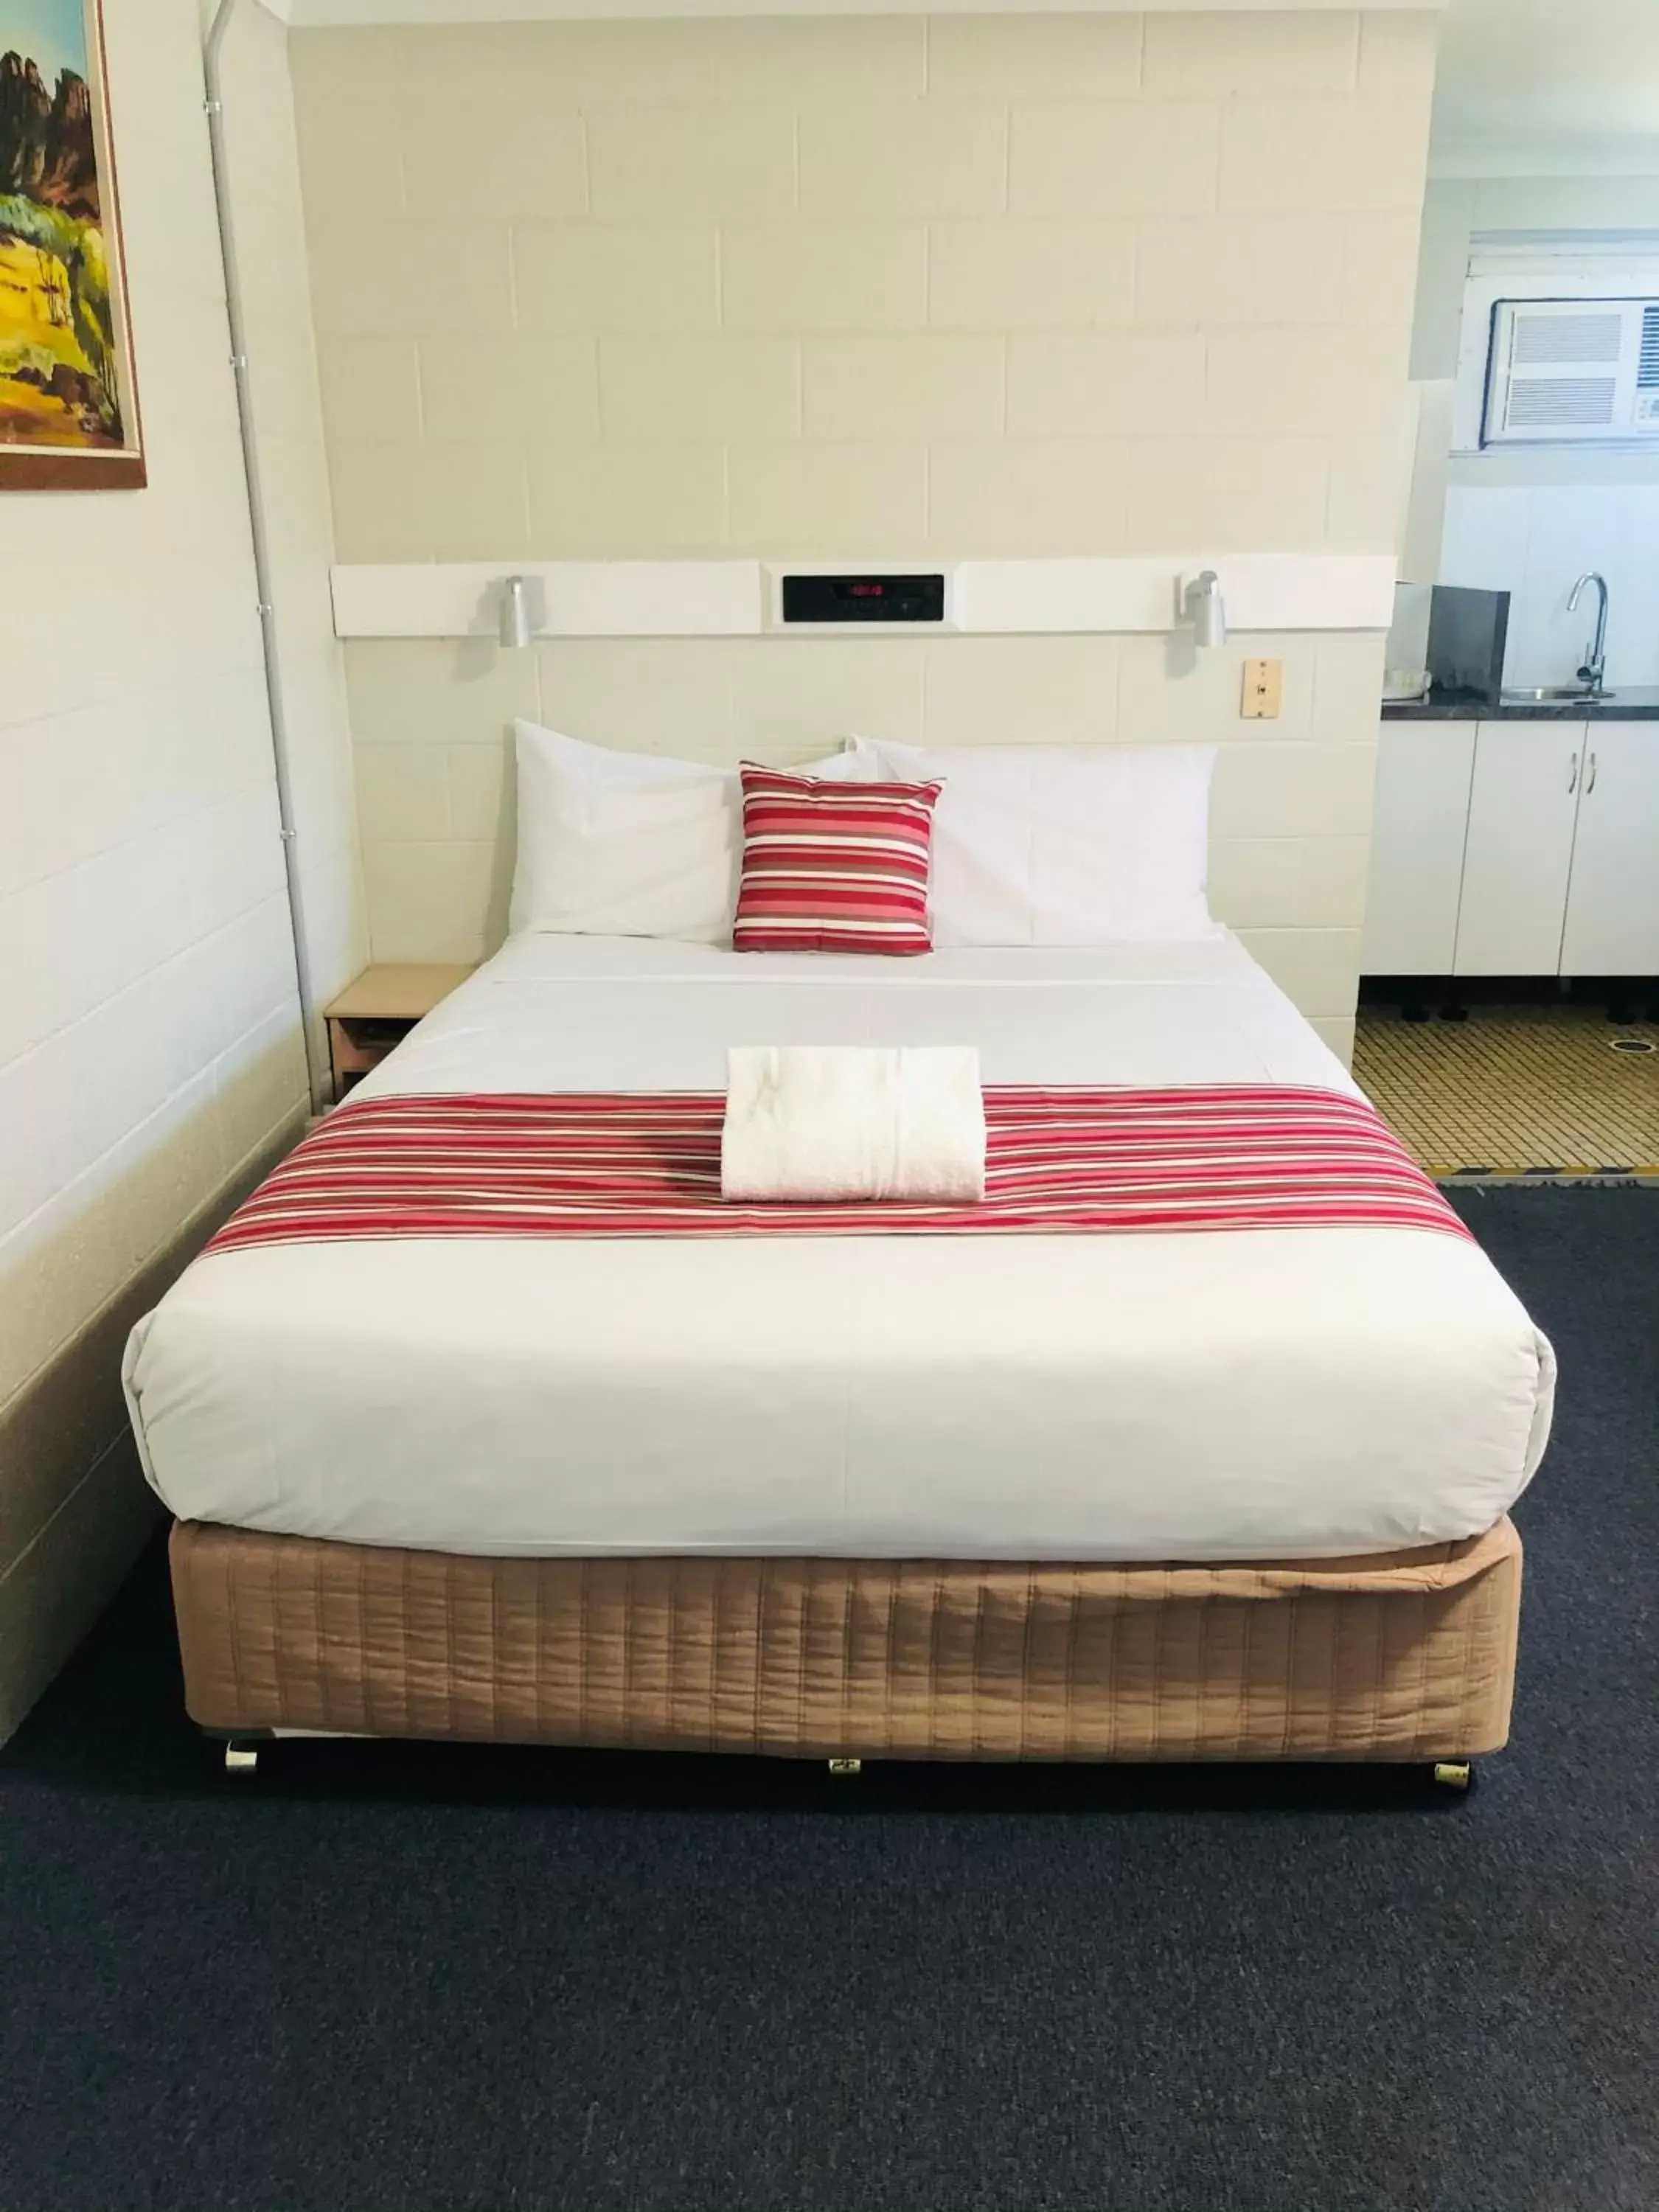 Bed in Central Coast Motel